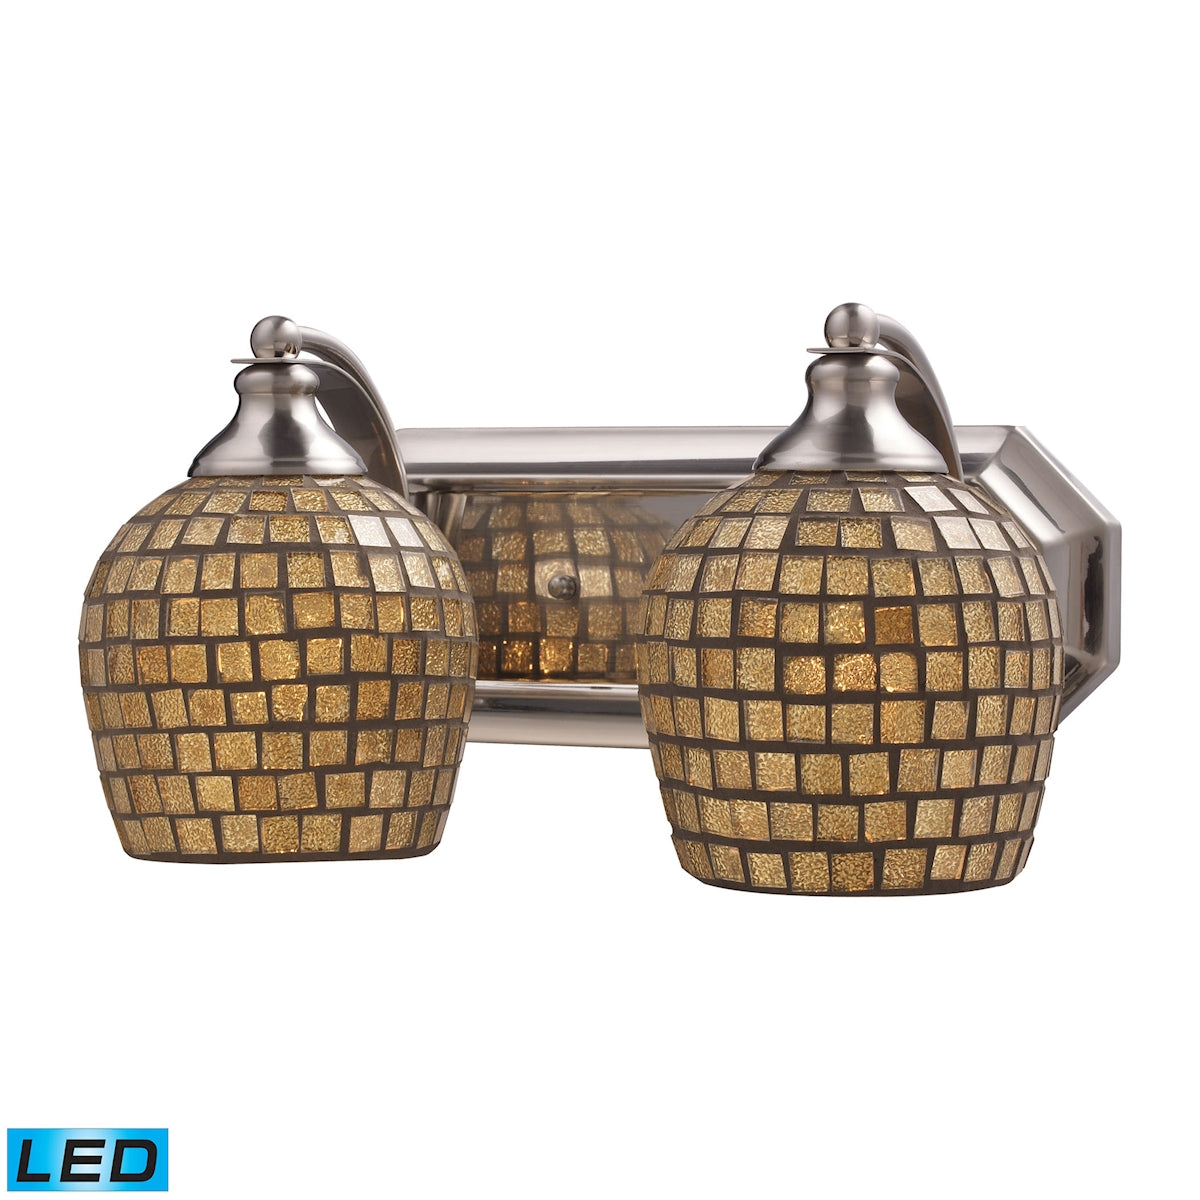 Mix-N-Match Vanity 2-Light Wall Lamp in Satin Nickel with Gold Leaf Glass - Includes LED Bulbs